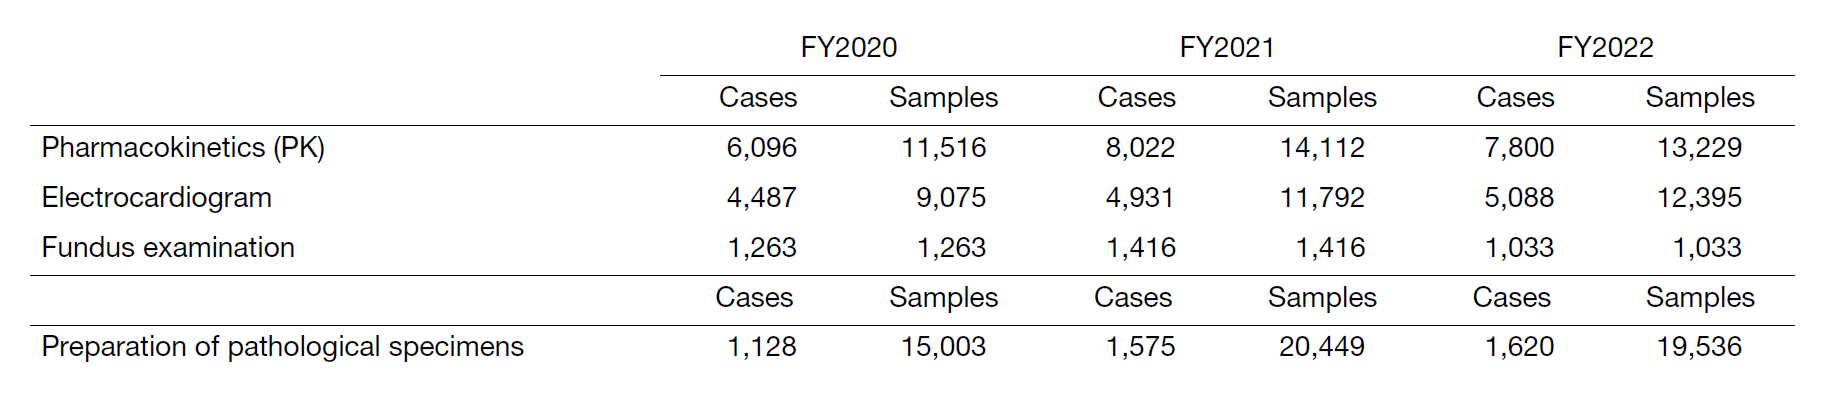 Table 2. Number of clinical trial tests performed in FY2022